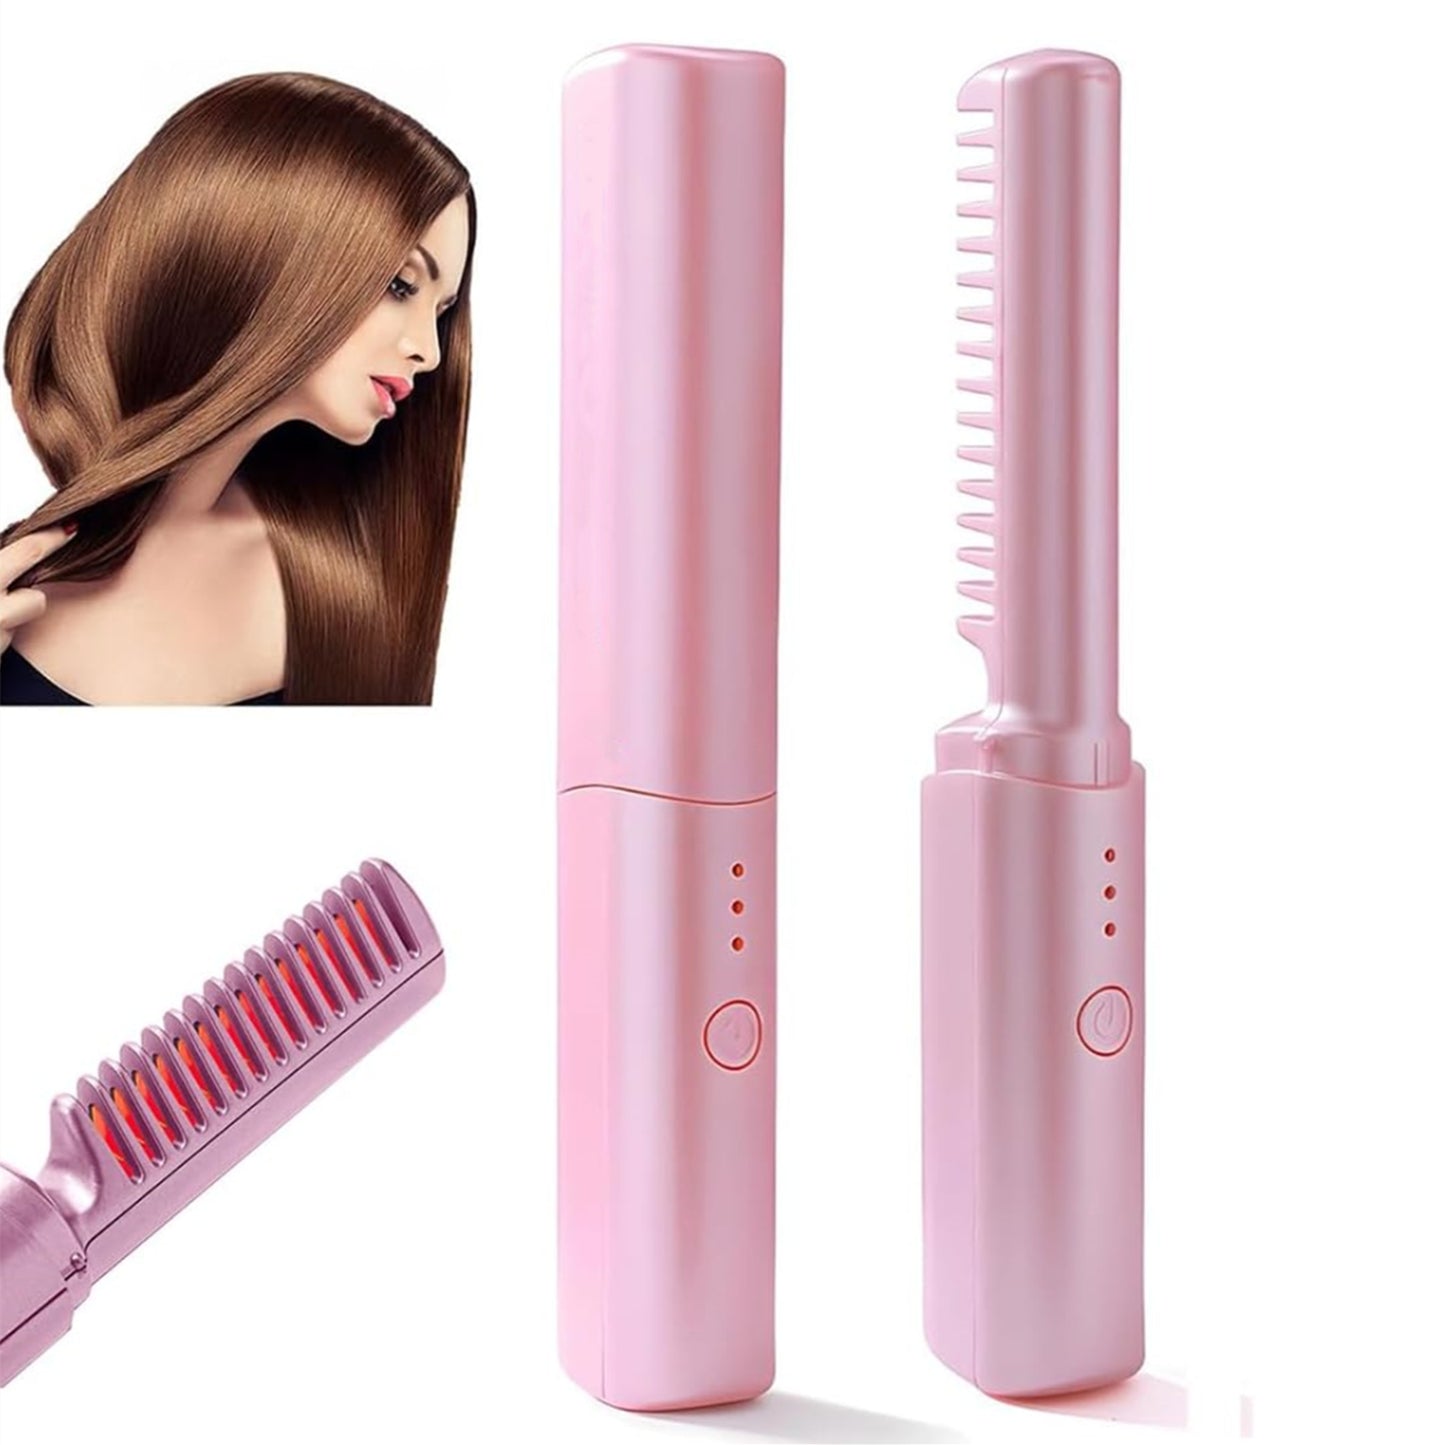 Personal Care Multifunctional Hairstyle Brush USB Rechargeable Mini Hair Straightener Cordless Hair Straightener Brush Curling Iron for Travel